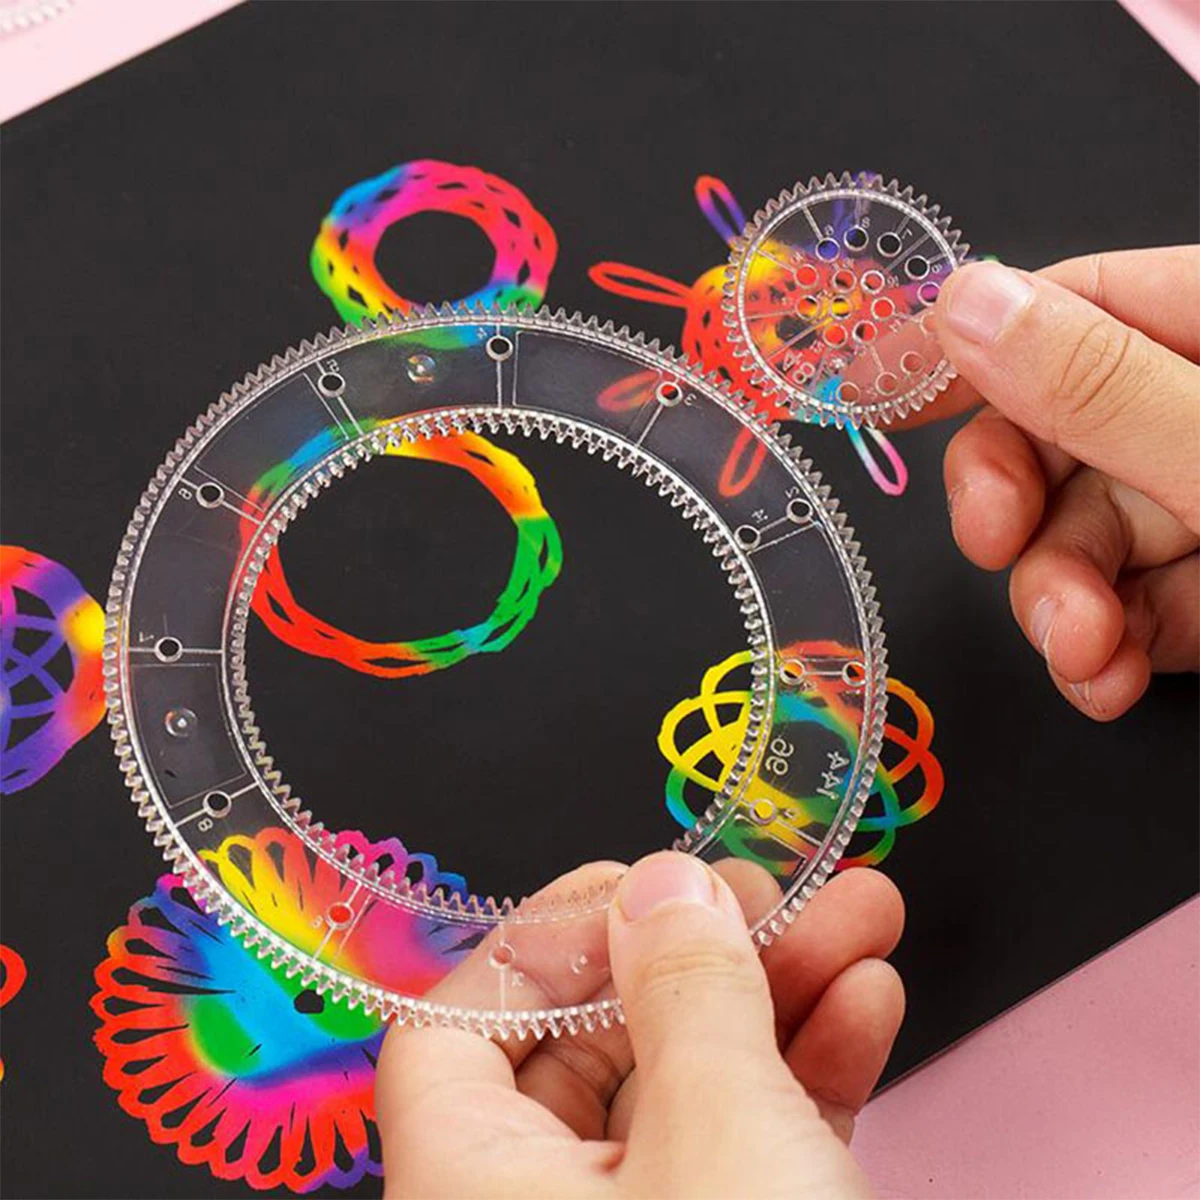 The Original Spirograph Deluxe Set - For Small Hands